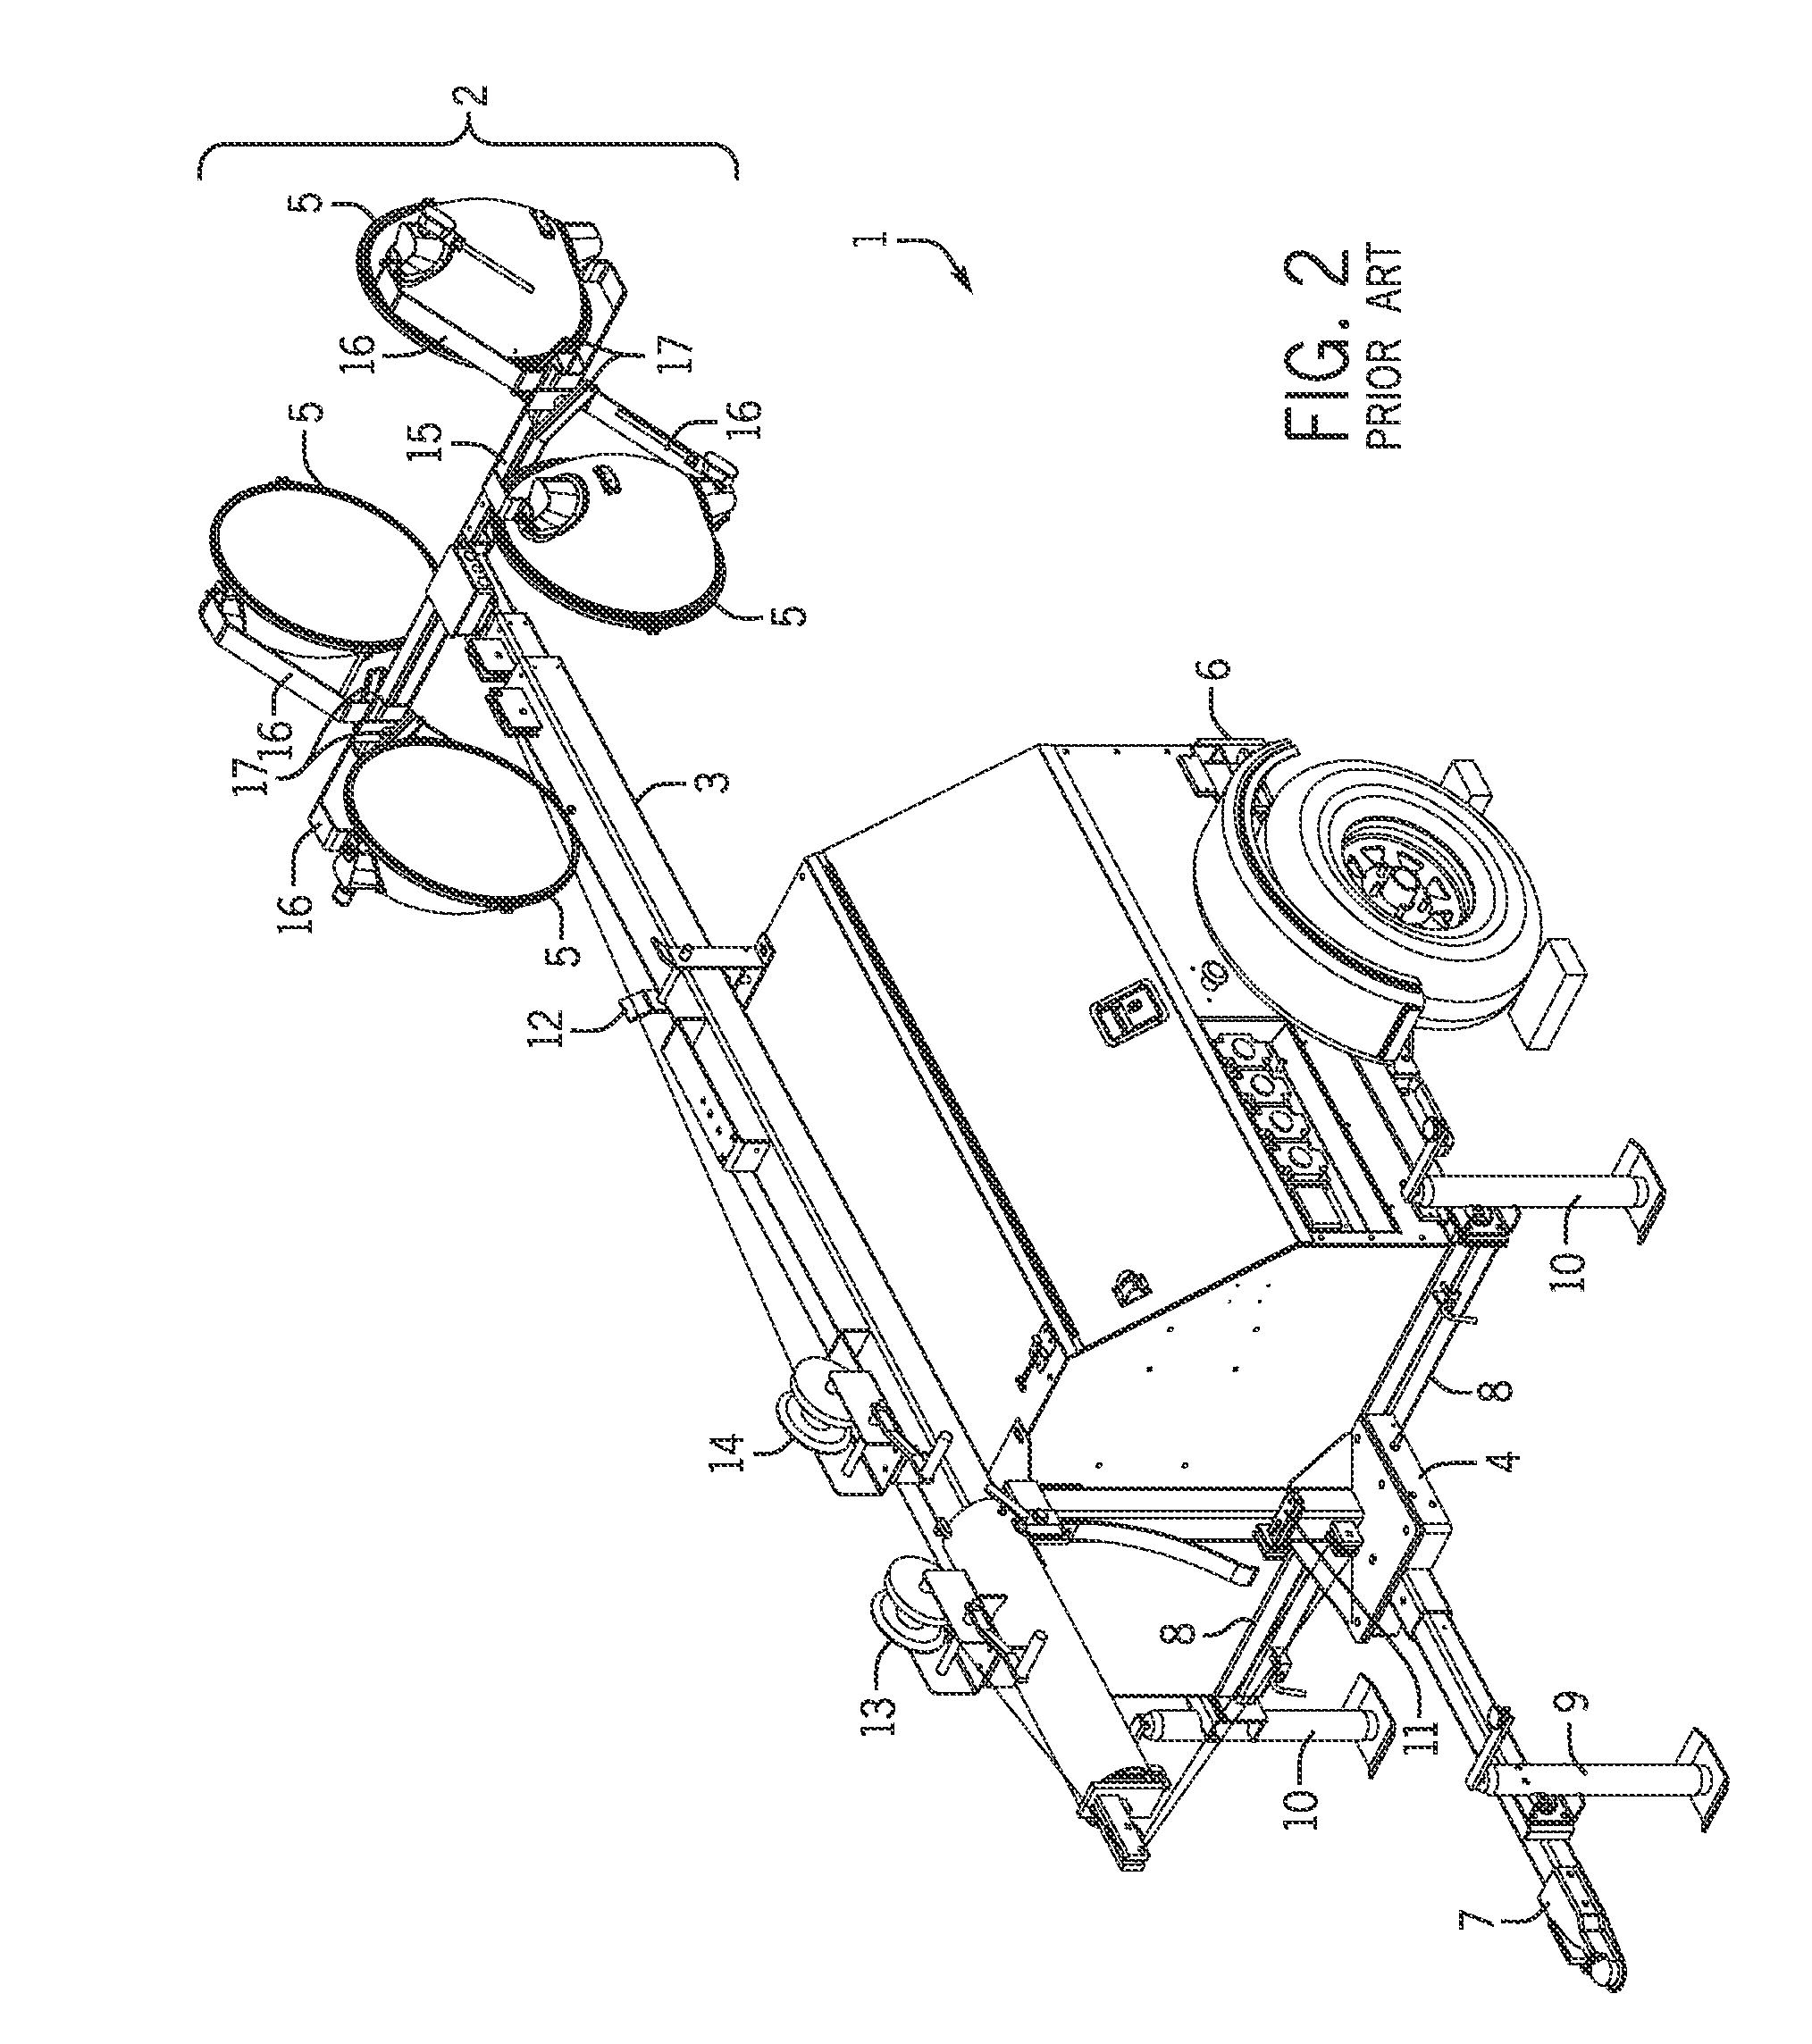 Light source assembly for portable lighting system